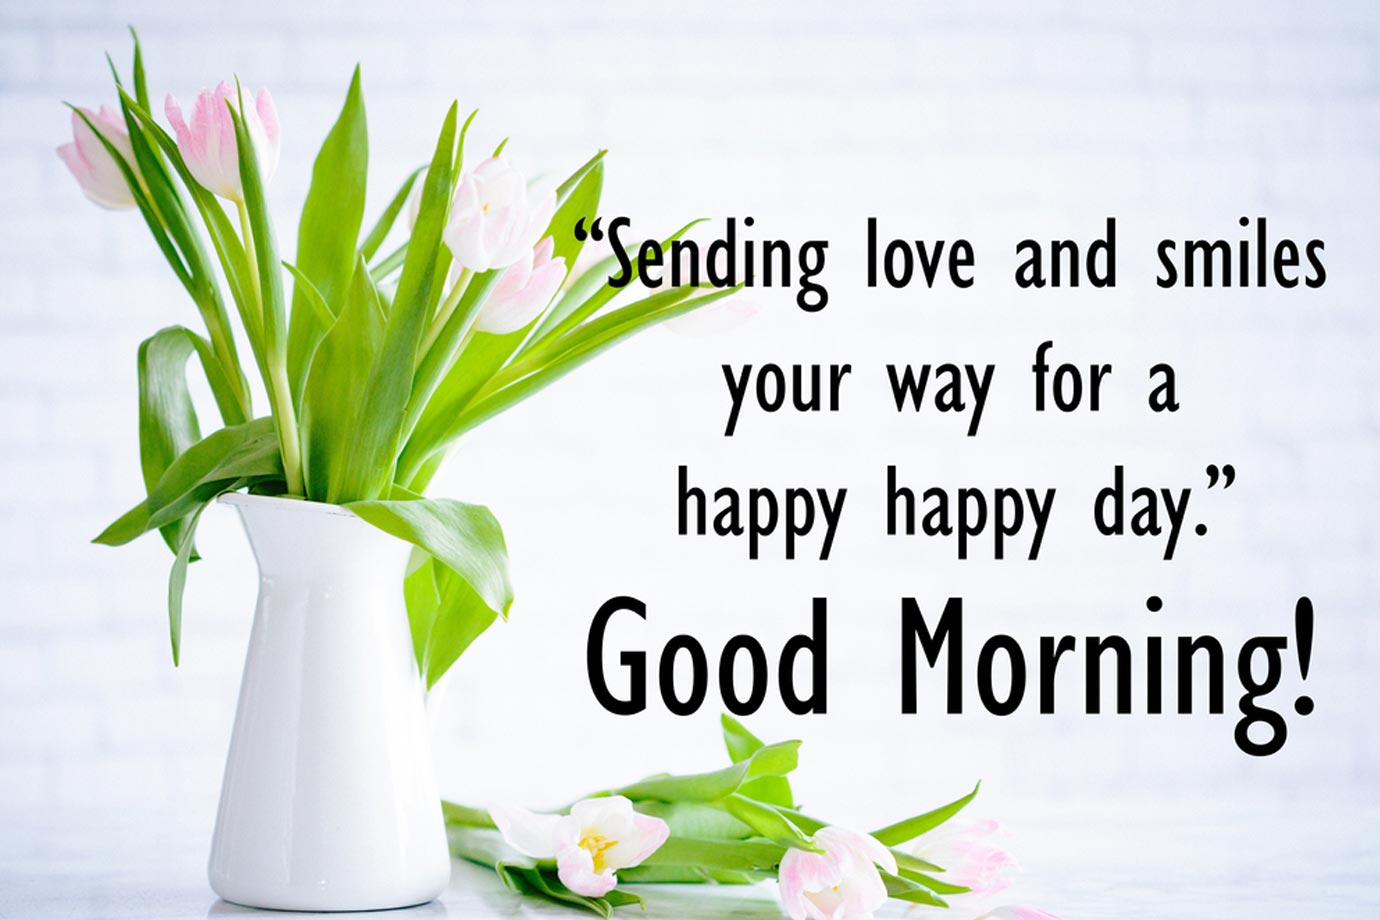 Good Morning Messages And Quotes: Say Good Morning To Your Friends And ...